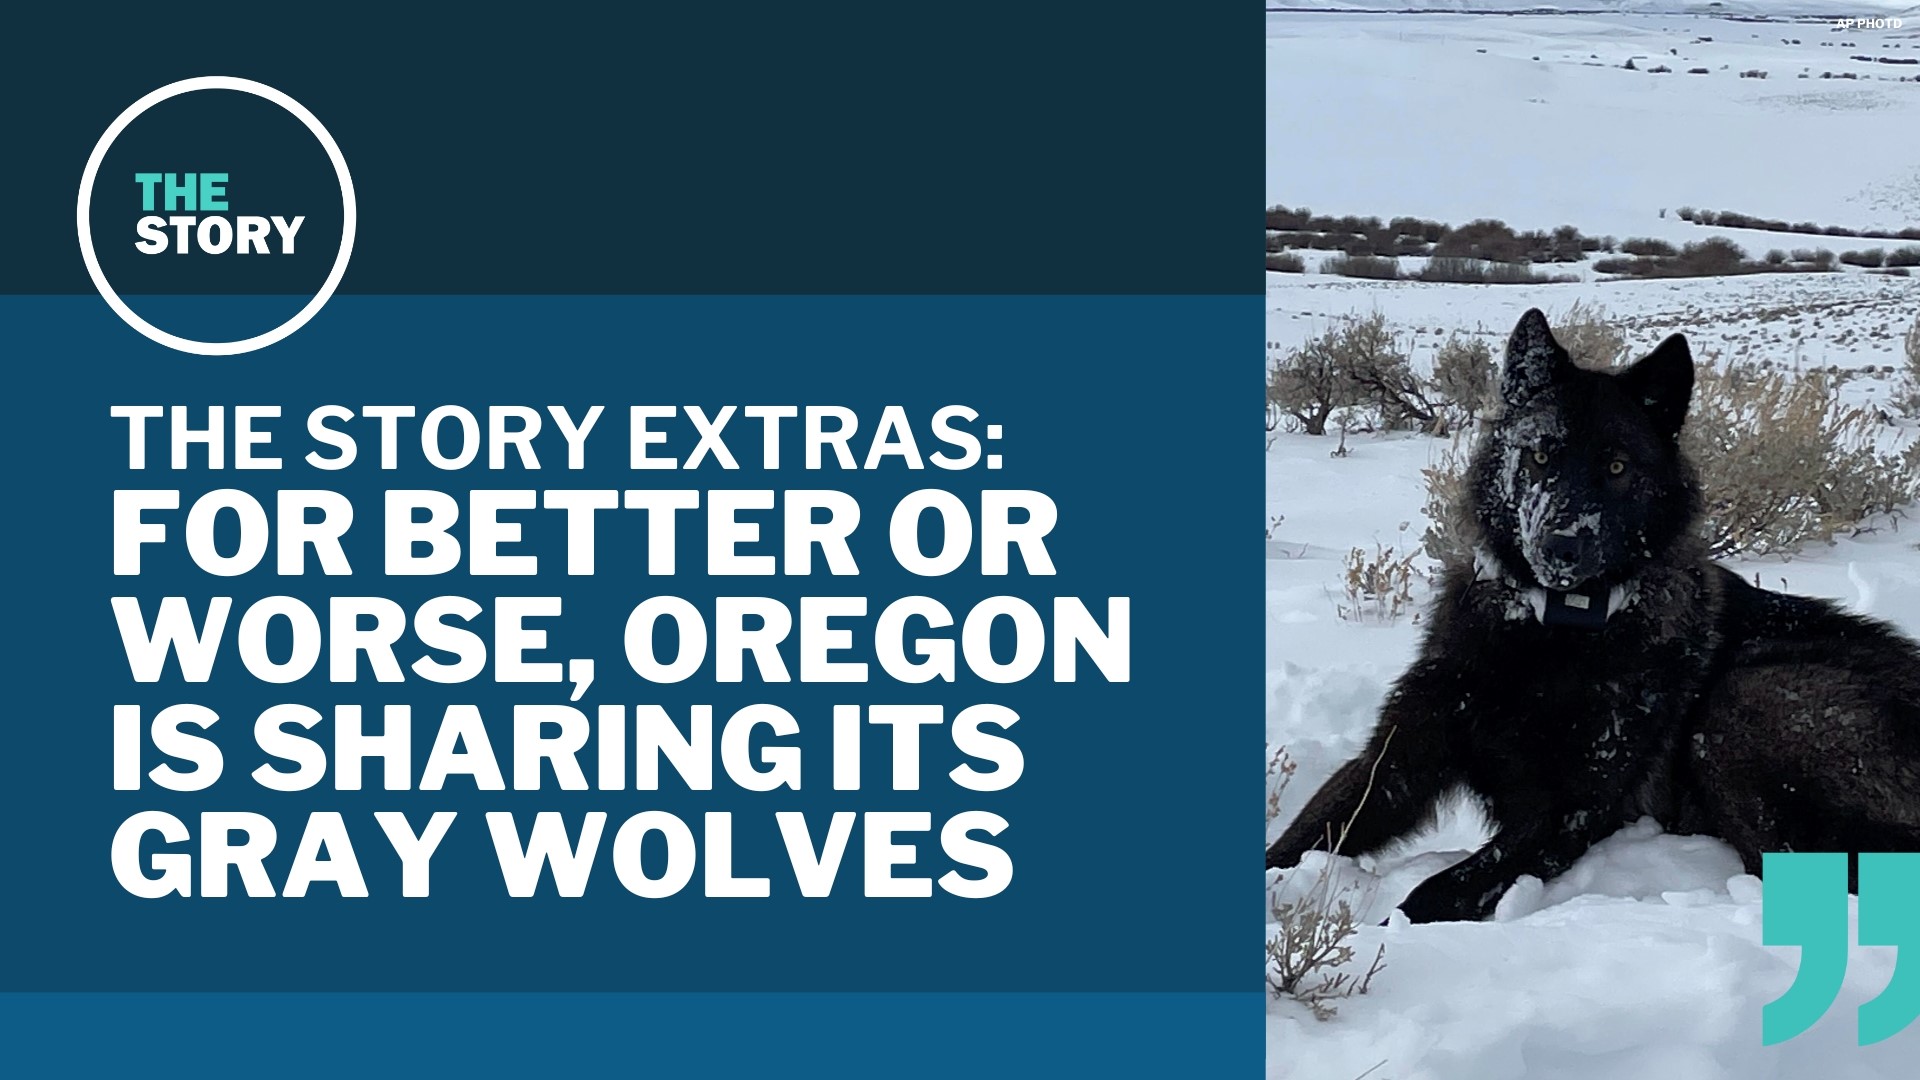 While gray wolves have been rebounding in Oregon, the last few years have been tough on them in terms of losses to various causes, now including a move to Colorado.